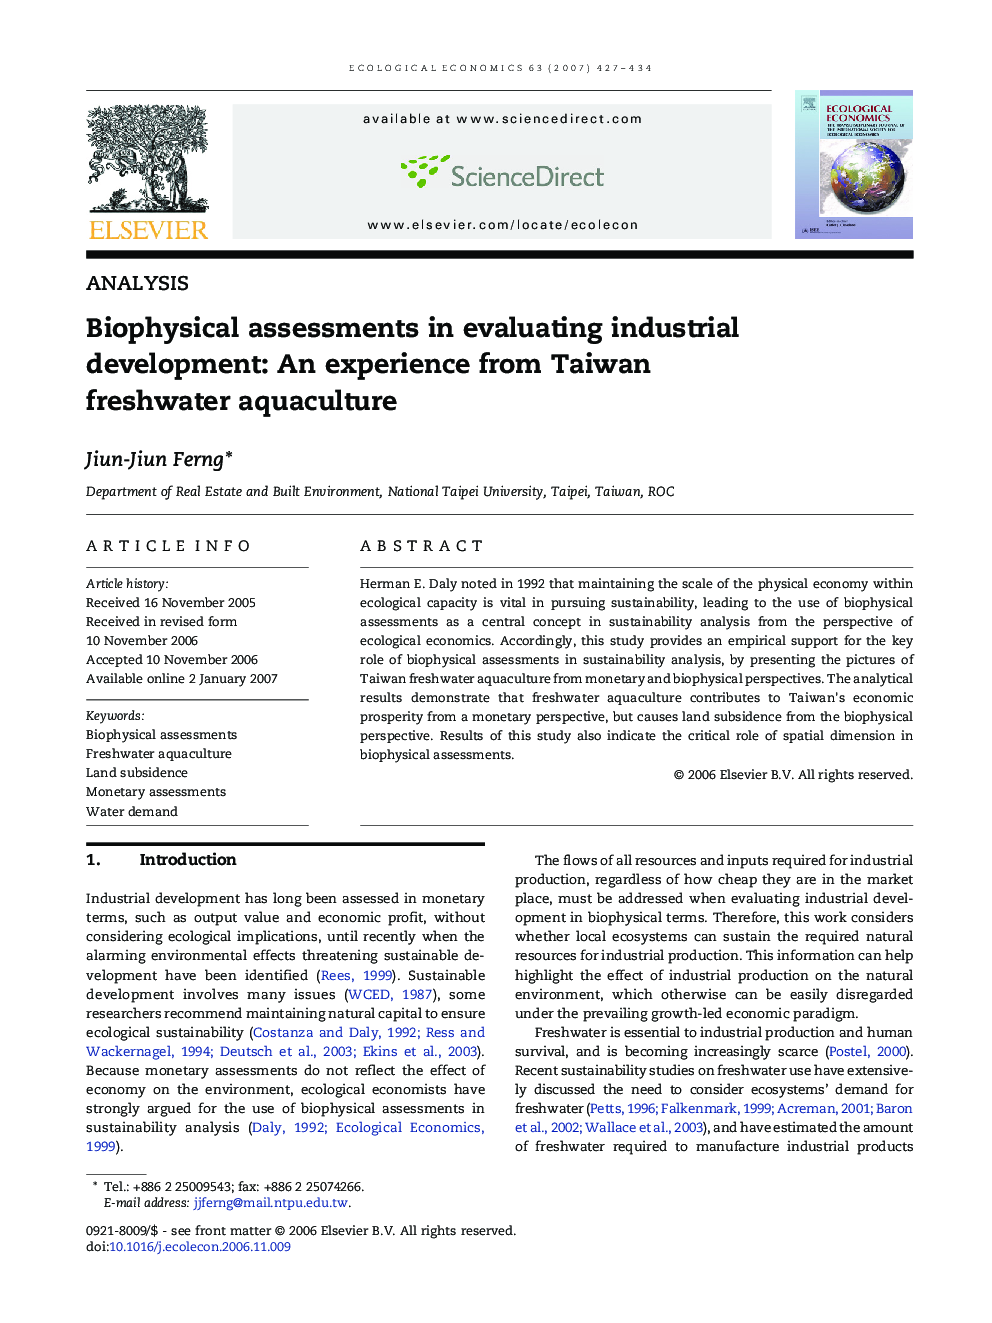 Biophysical assessments in evaluating industrial development: An experience from Taiwan freshwater aquaculture